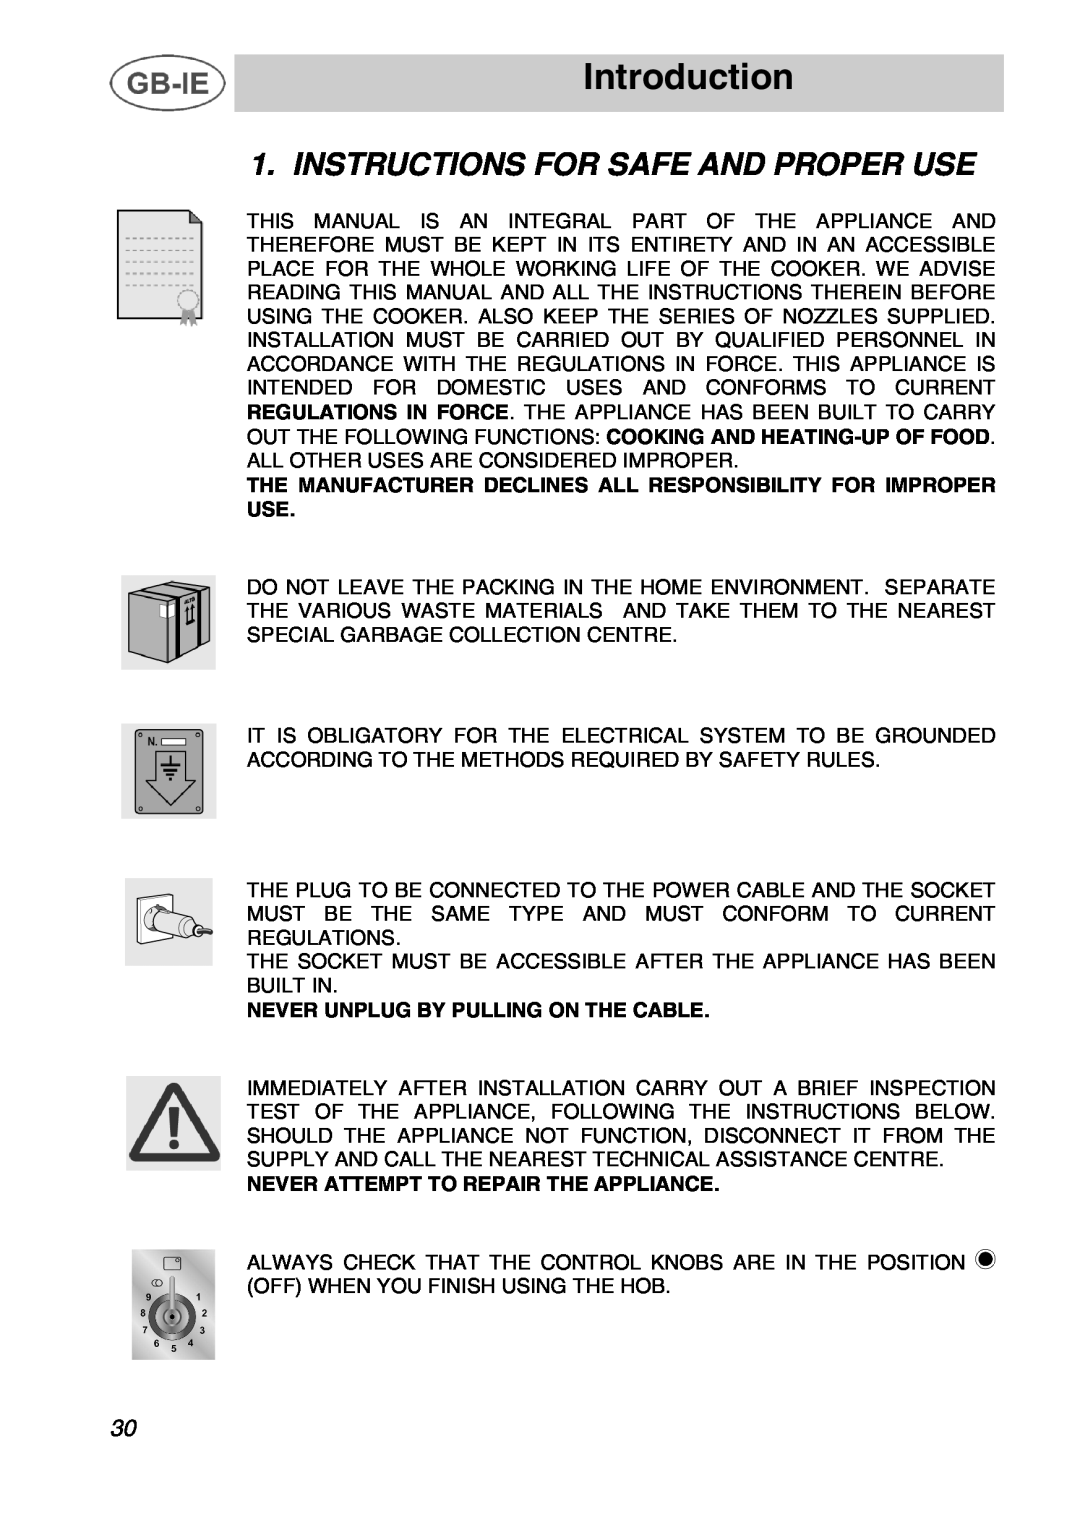 Smeg A42C instruction manual Introduction, Instructions For Safe And Proper Use, Never Unplug By Pulling On The Cable 